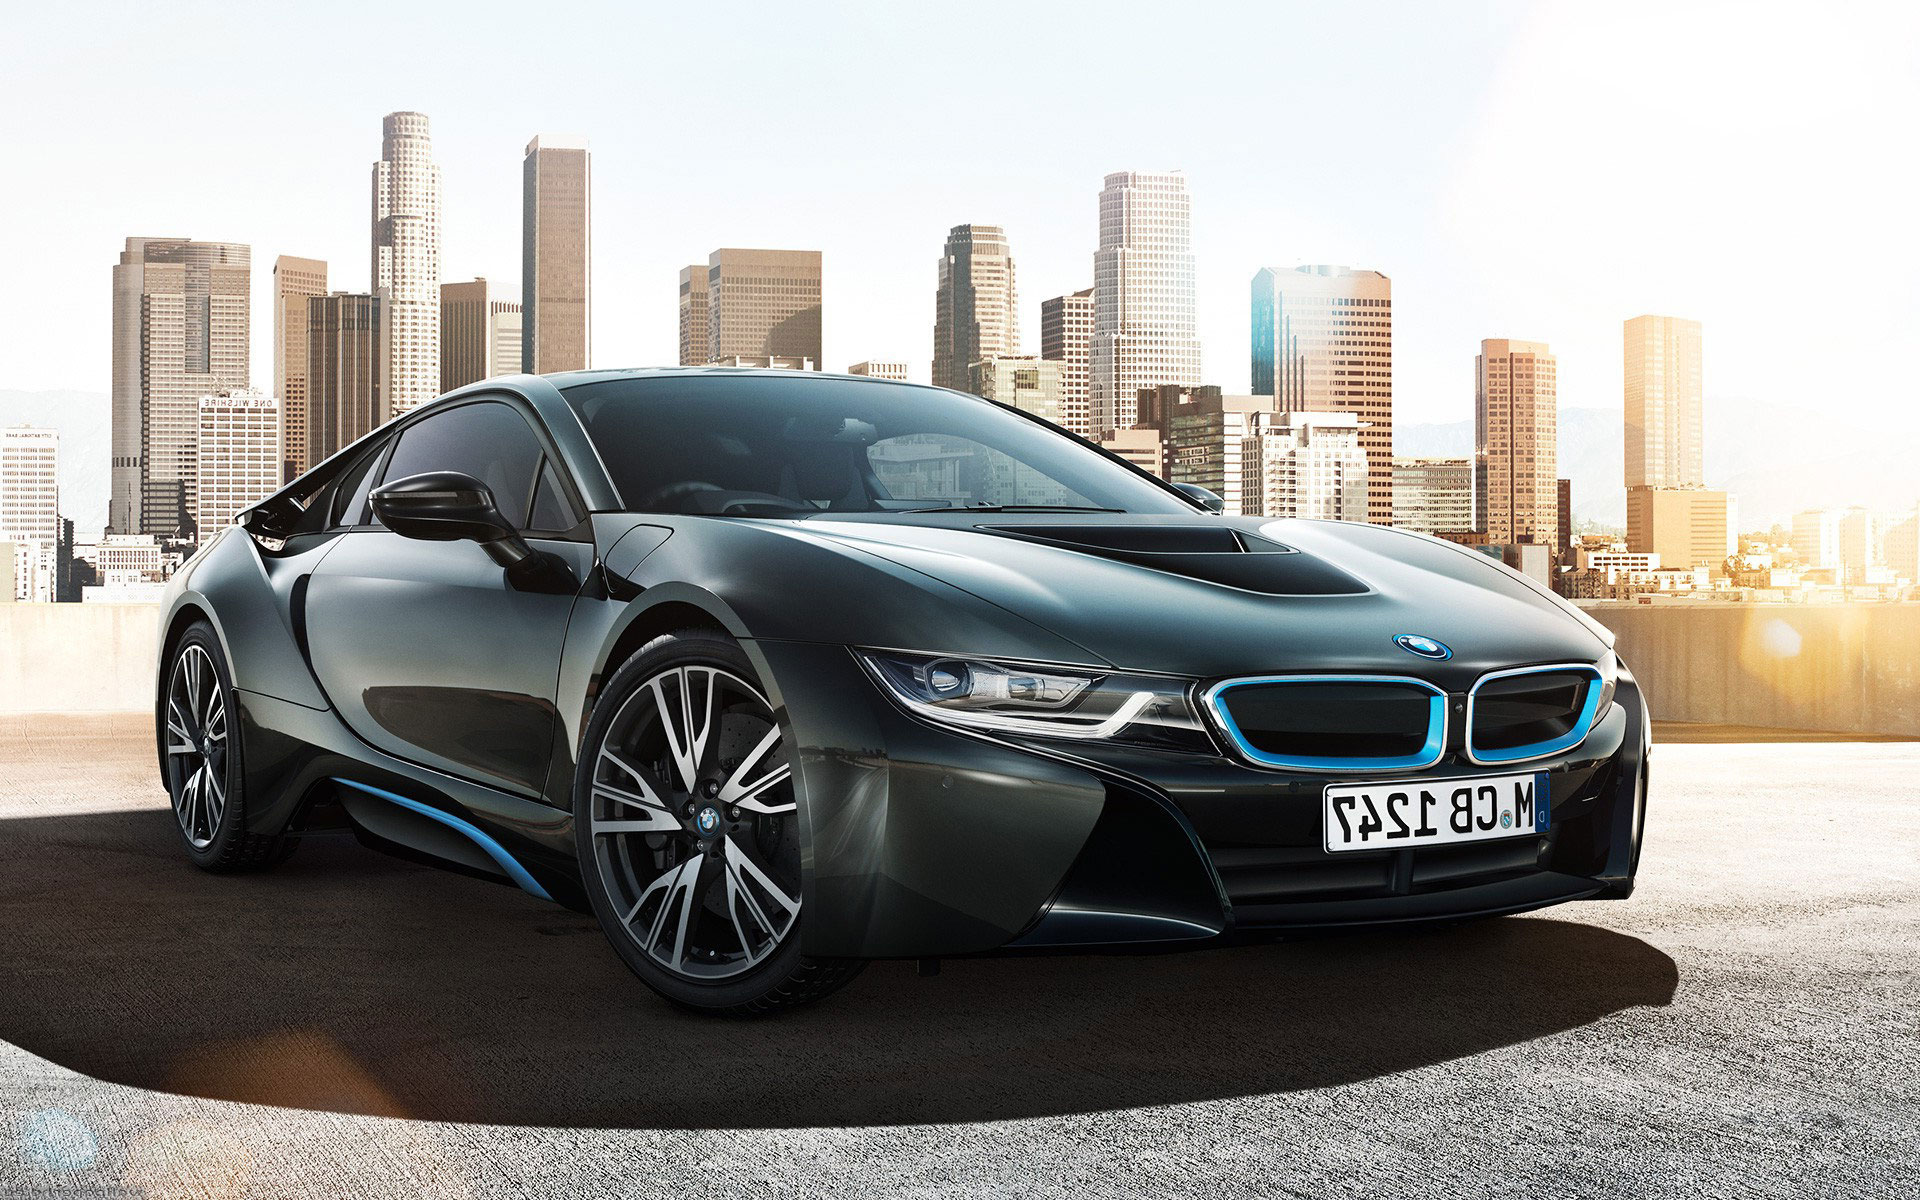 Free Download Bmw I8 Backgrounds 